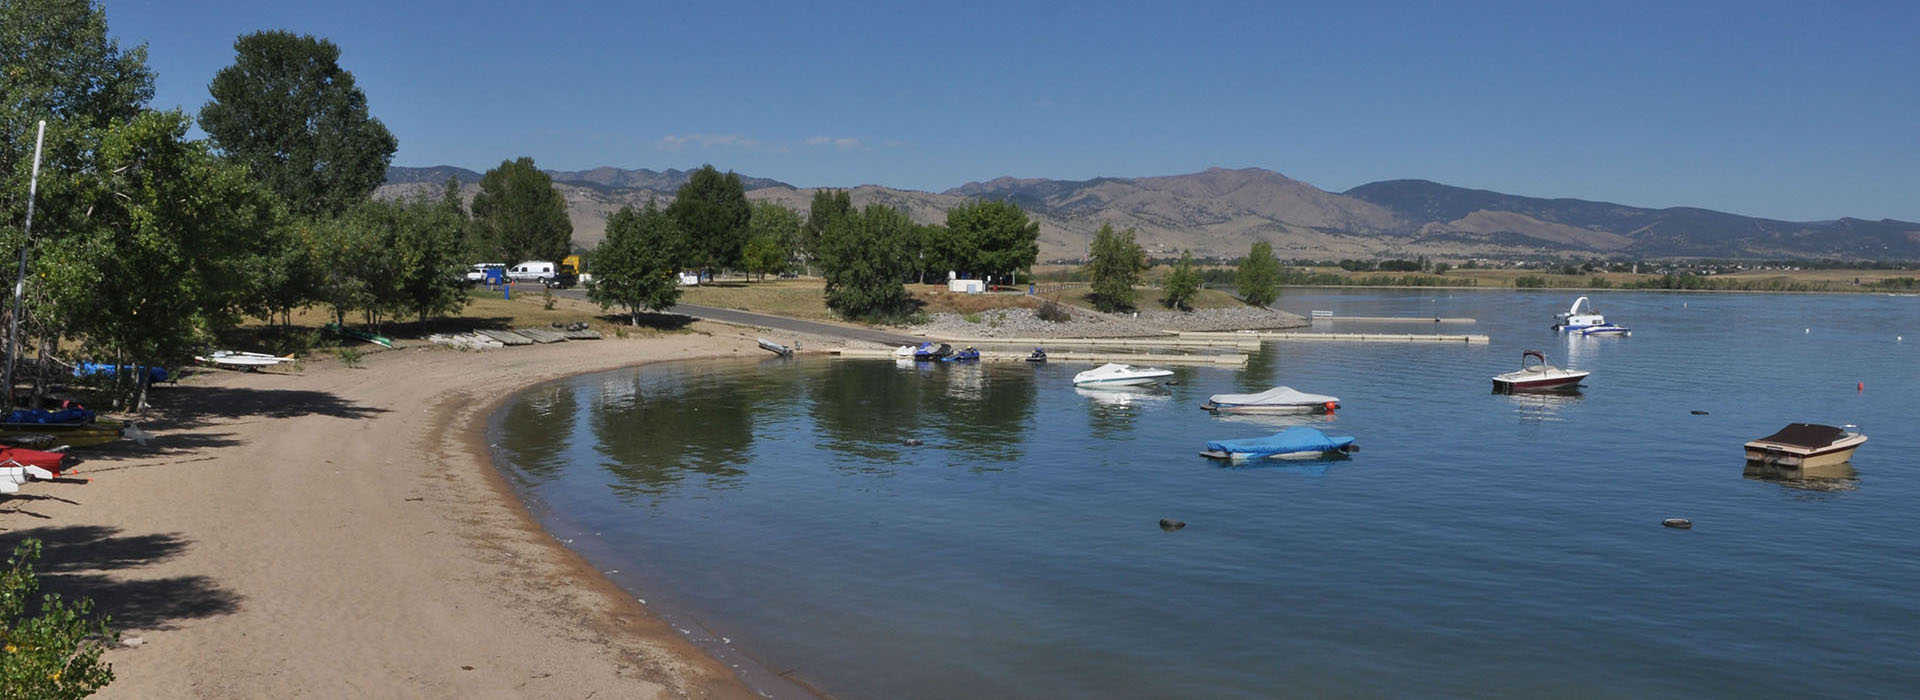 Boats in the water at Boulder Reservoir.